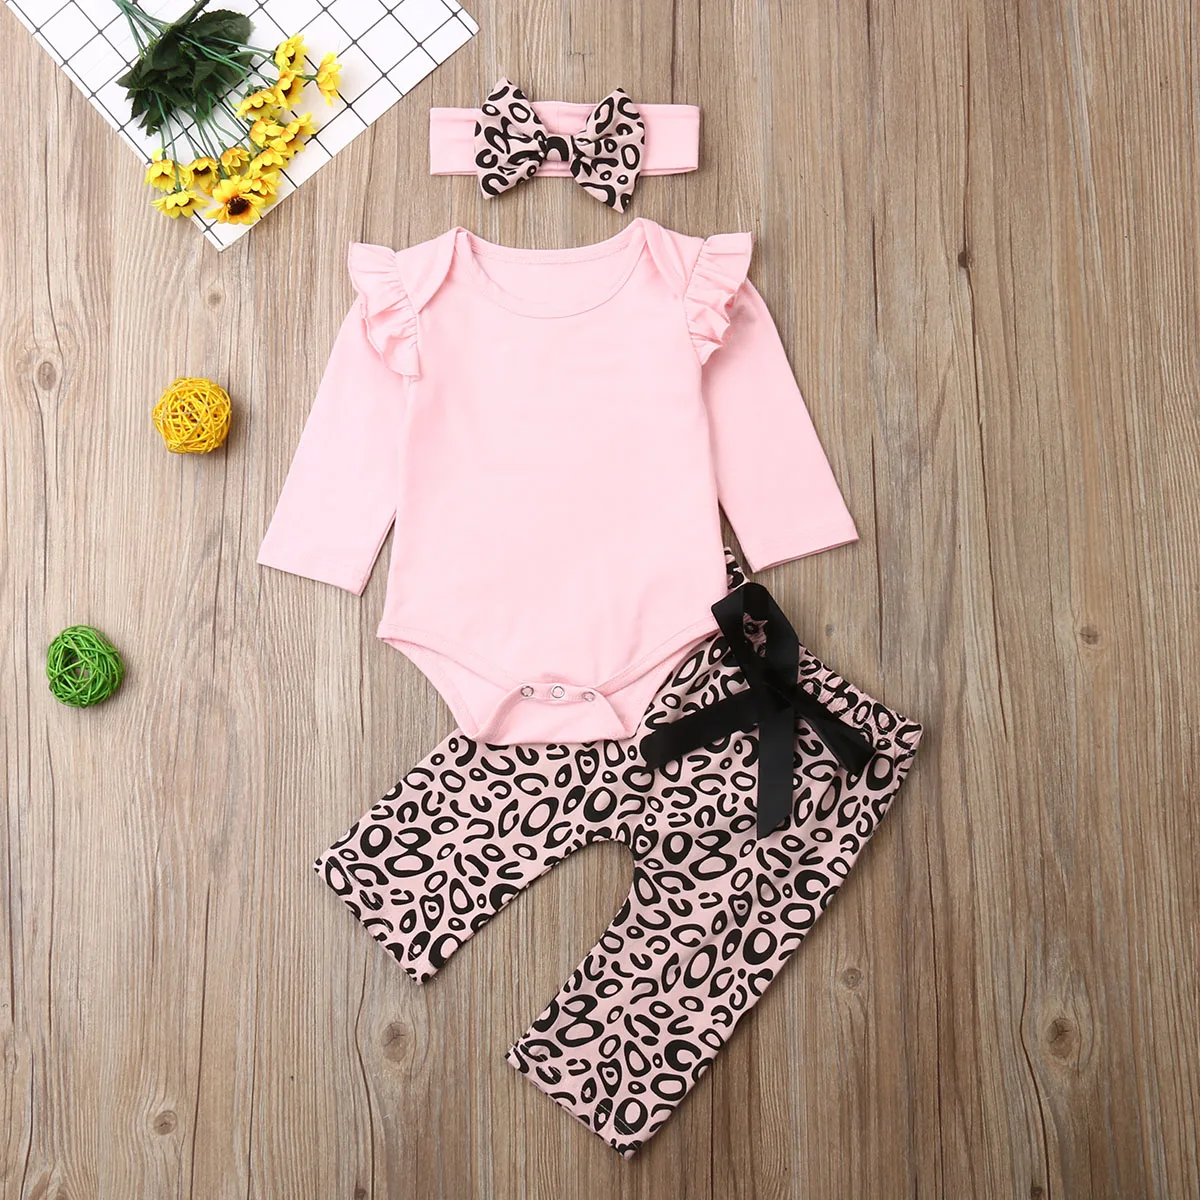 Фото - Pudcoco Newborn Baby Girl Clothes Fly Sleeve Knitting Cotton Romper Tops Leopard Print Long Pants Headband 3Pcs Outfits Clothes infant baby girl cotton print clothes newborn letter print long sleeve leopard pants headband set 3pcs toddler clothing outfits